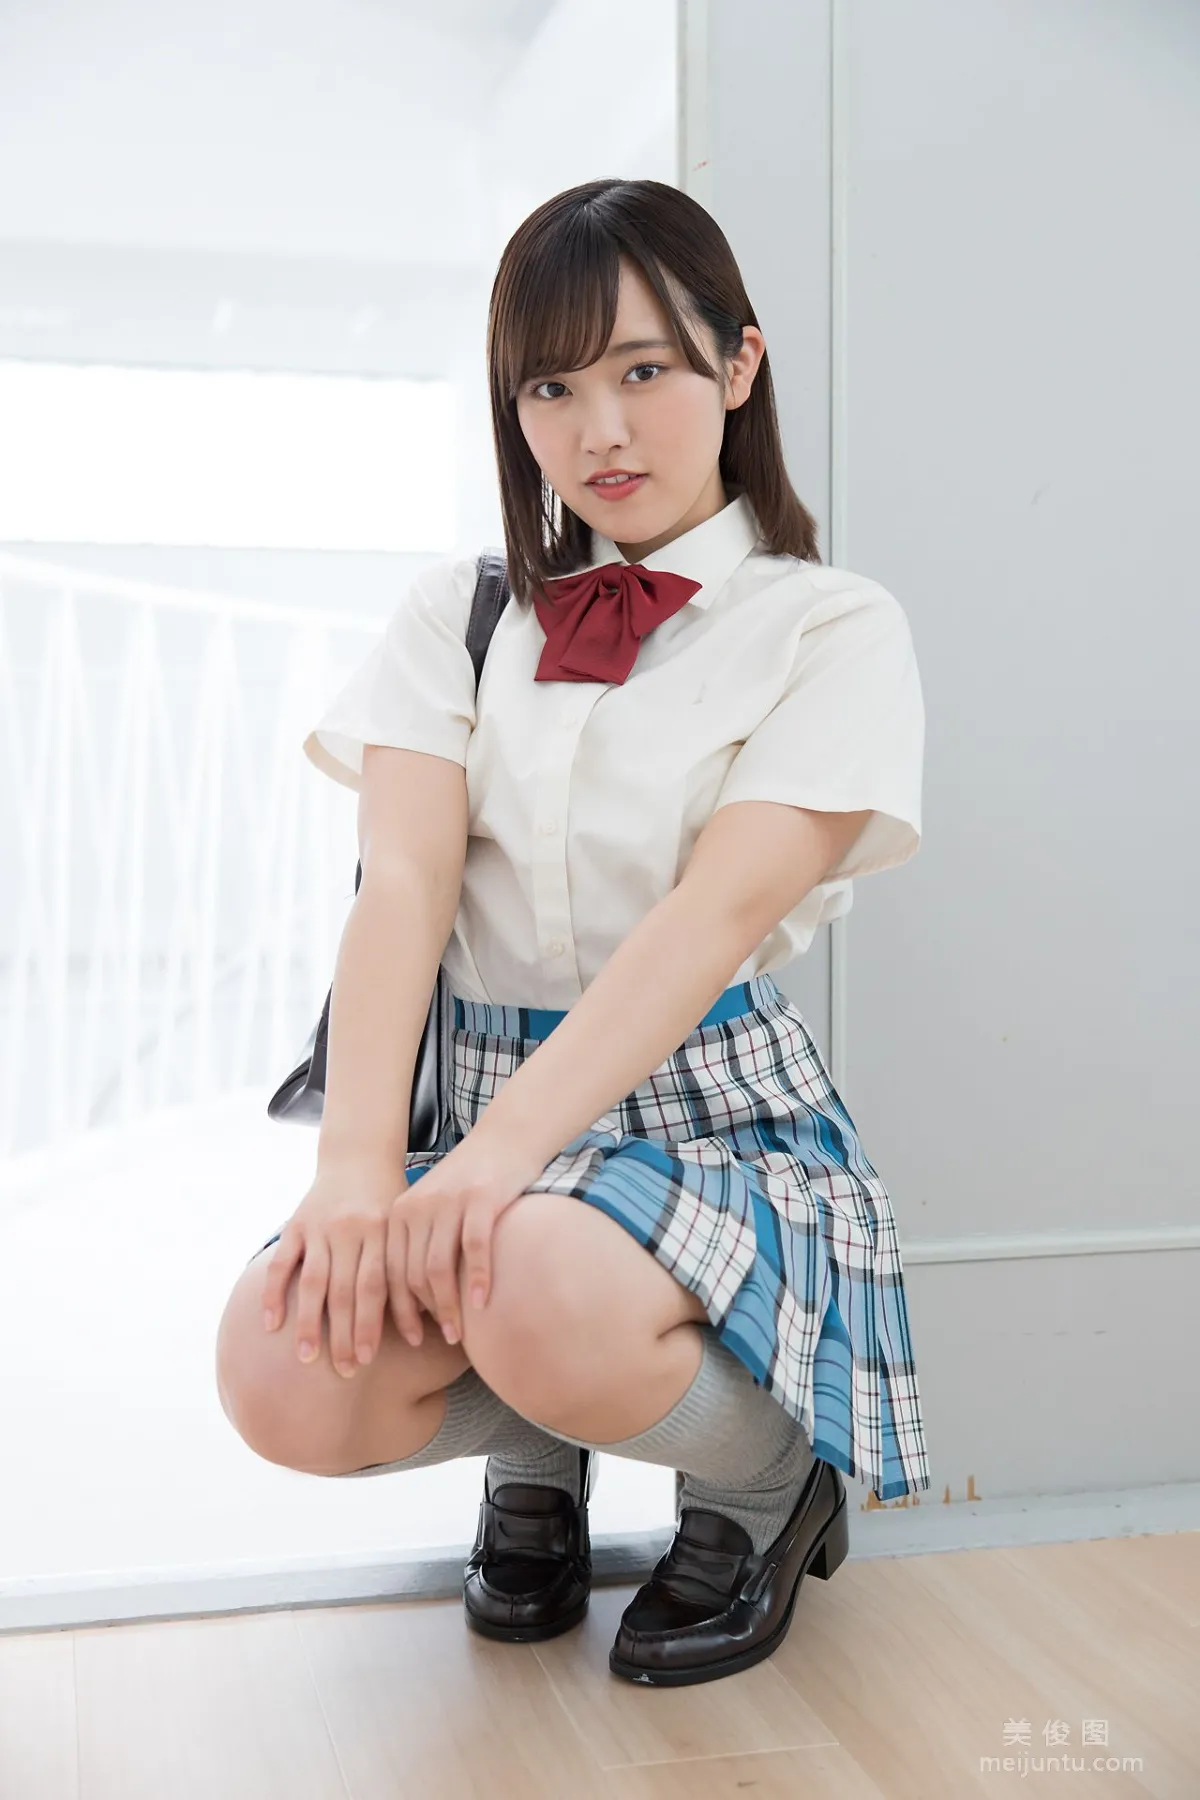 [Minisuka.tv] 香月りお - Limited Gallery 21.15